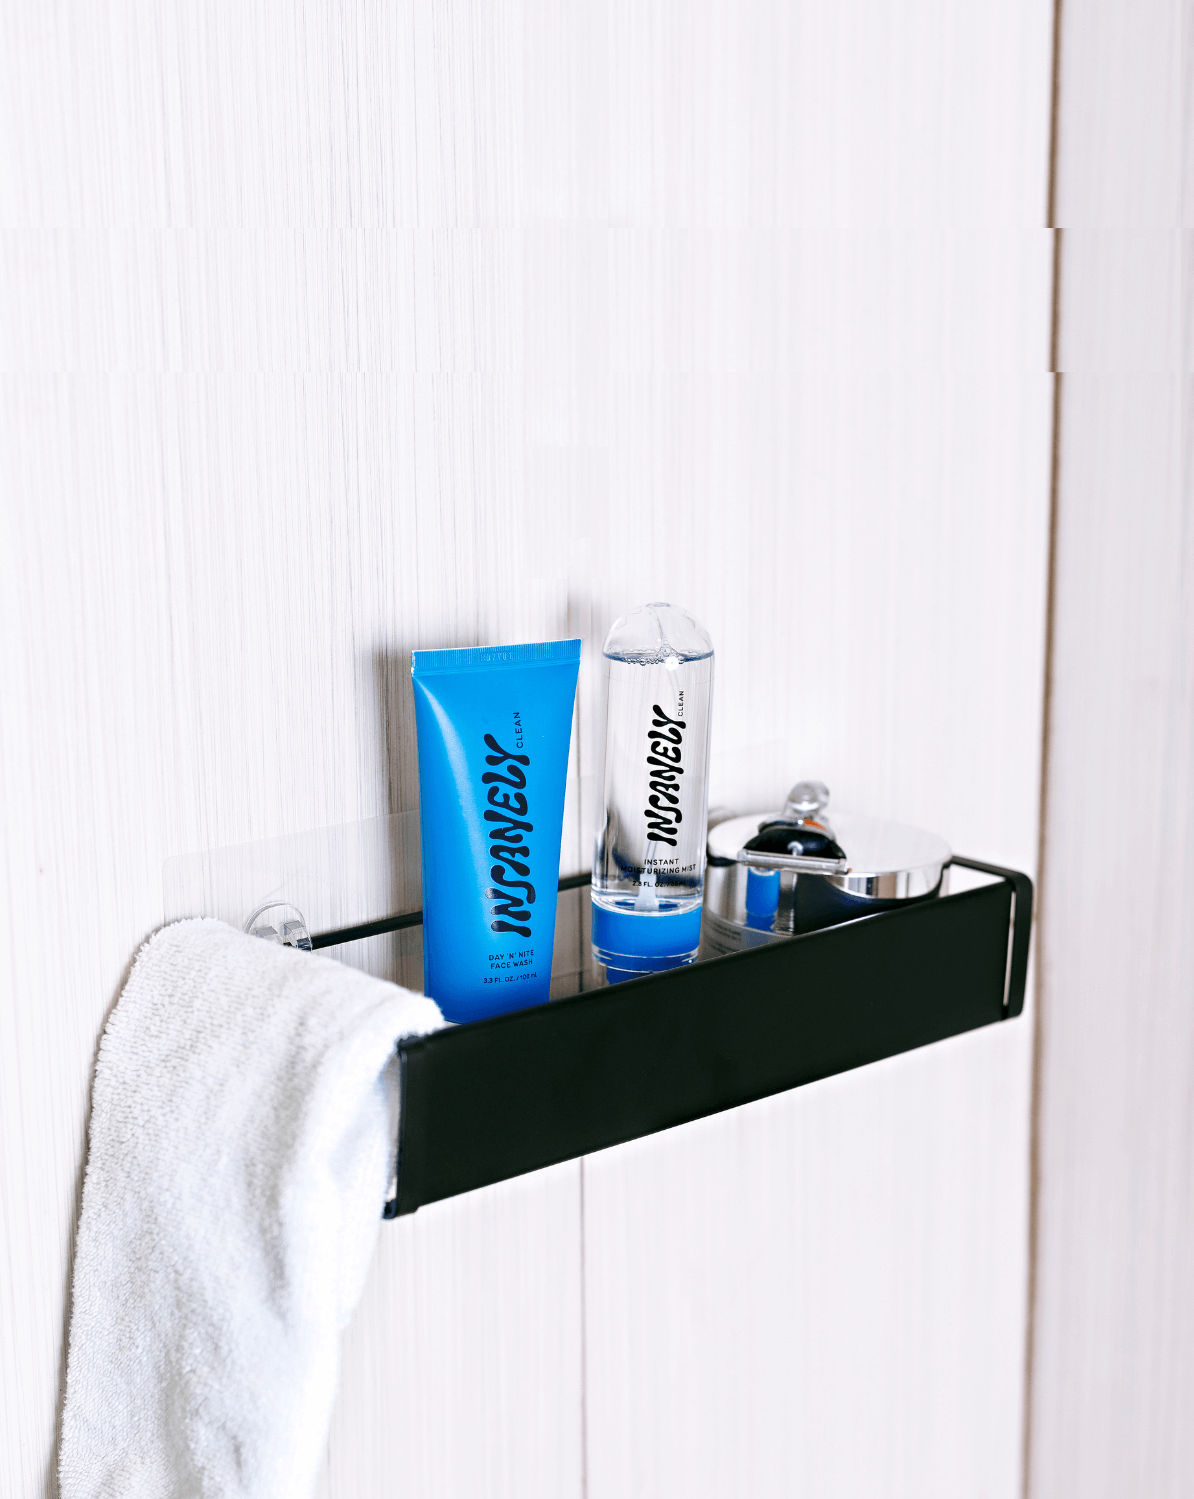 Men's skincare products displayed on a shelf in the bathroom.